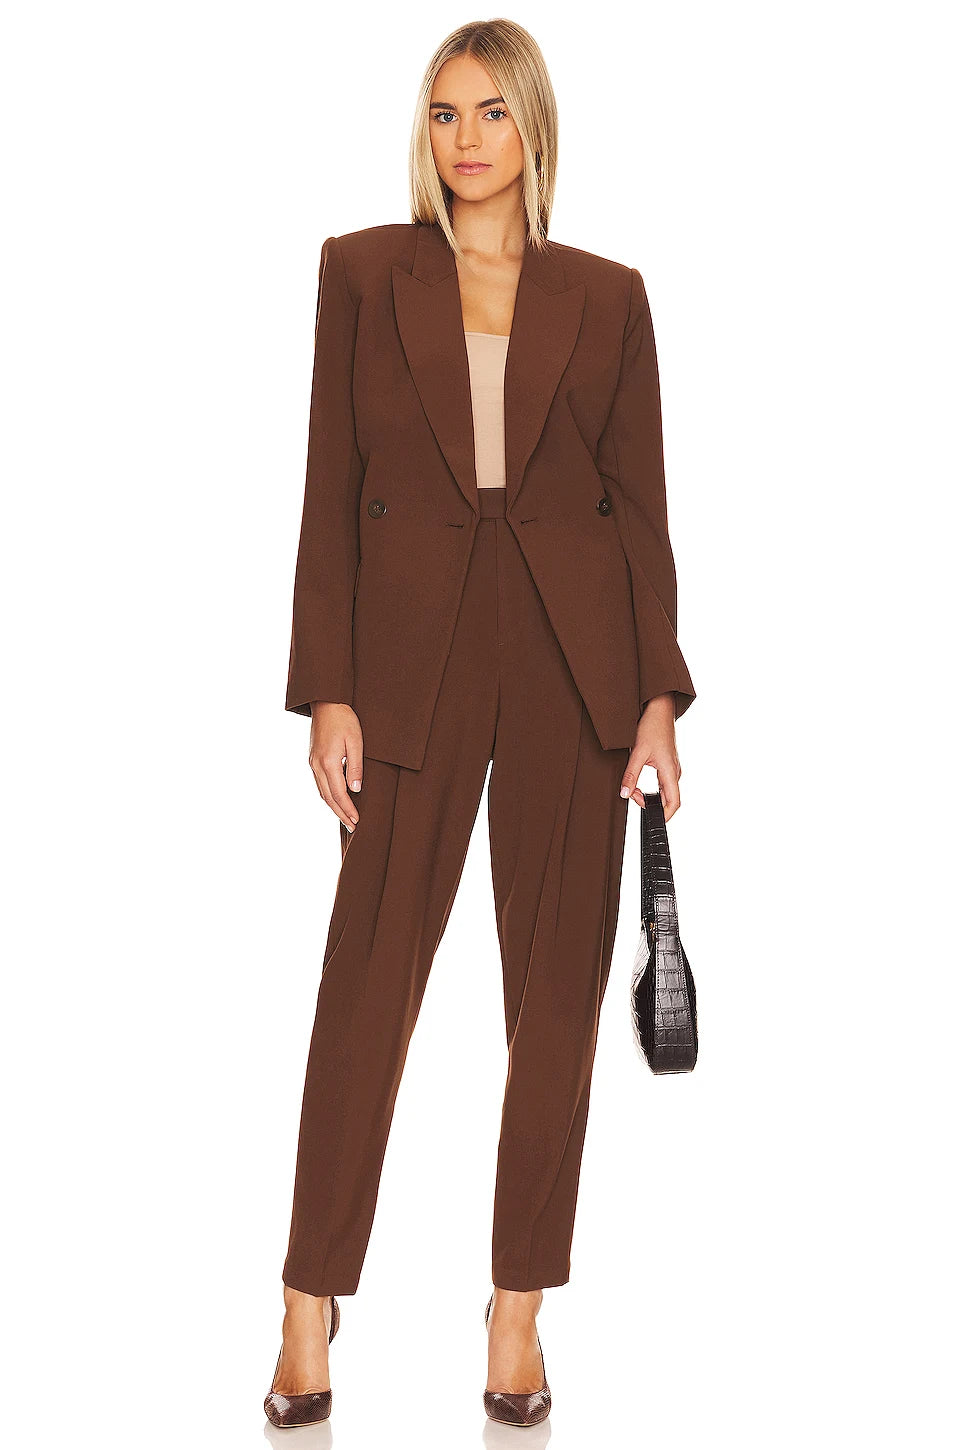 Brave the business world in style with the Ensemble Helene! This two-piece set offers a modern twist on the classic business suit with its neutral tones and sharp lines. Perfect for the bold, brave commuter who loves to take risks! Let your style do the talking with Ensemble Helene.